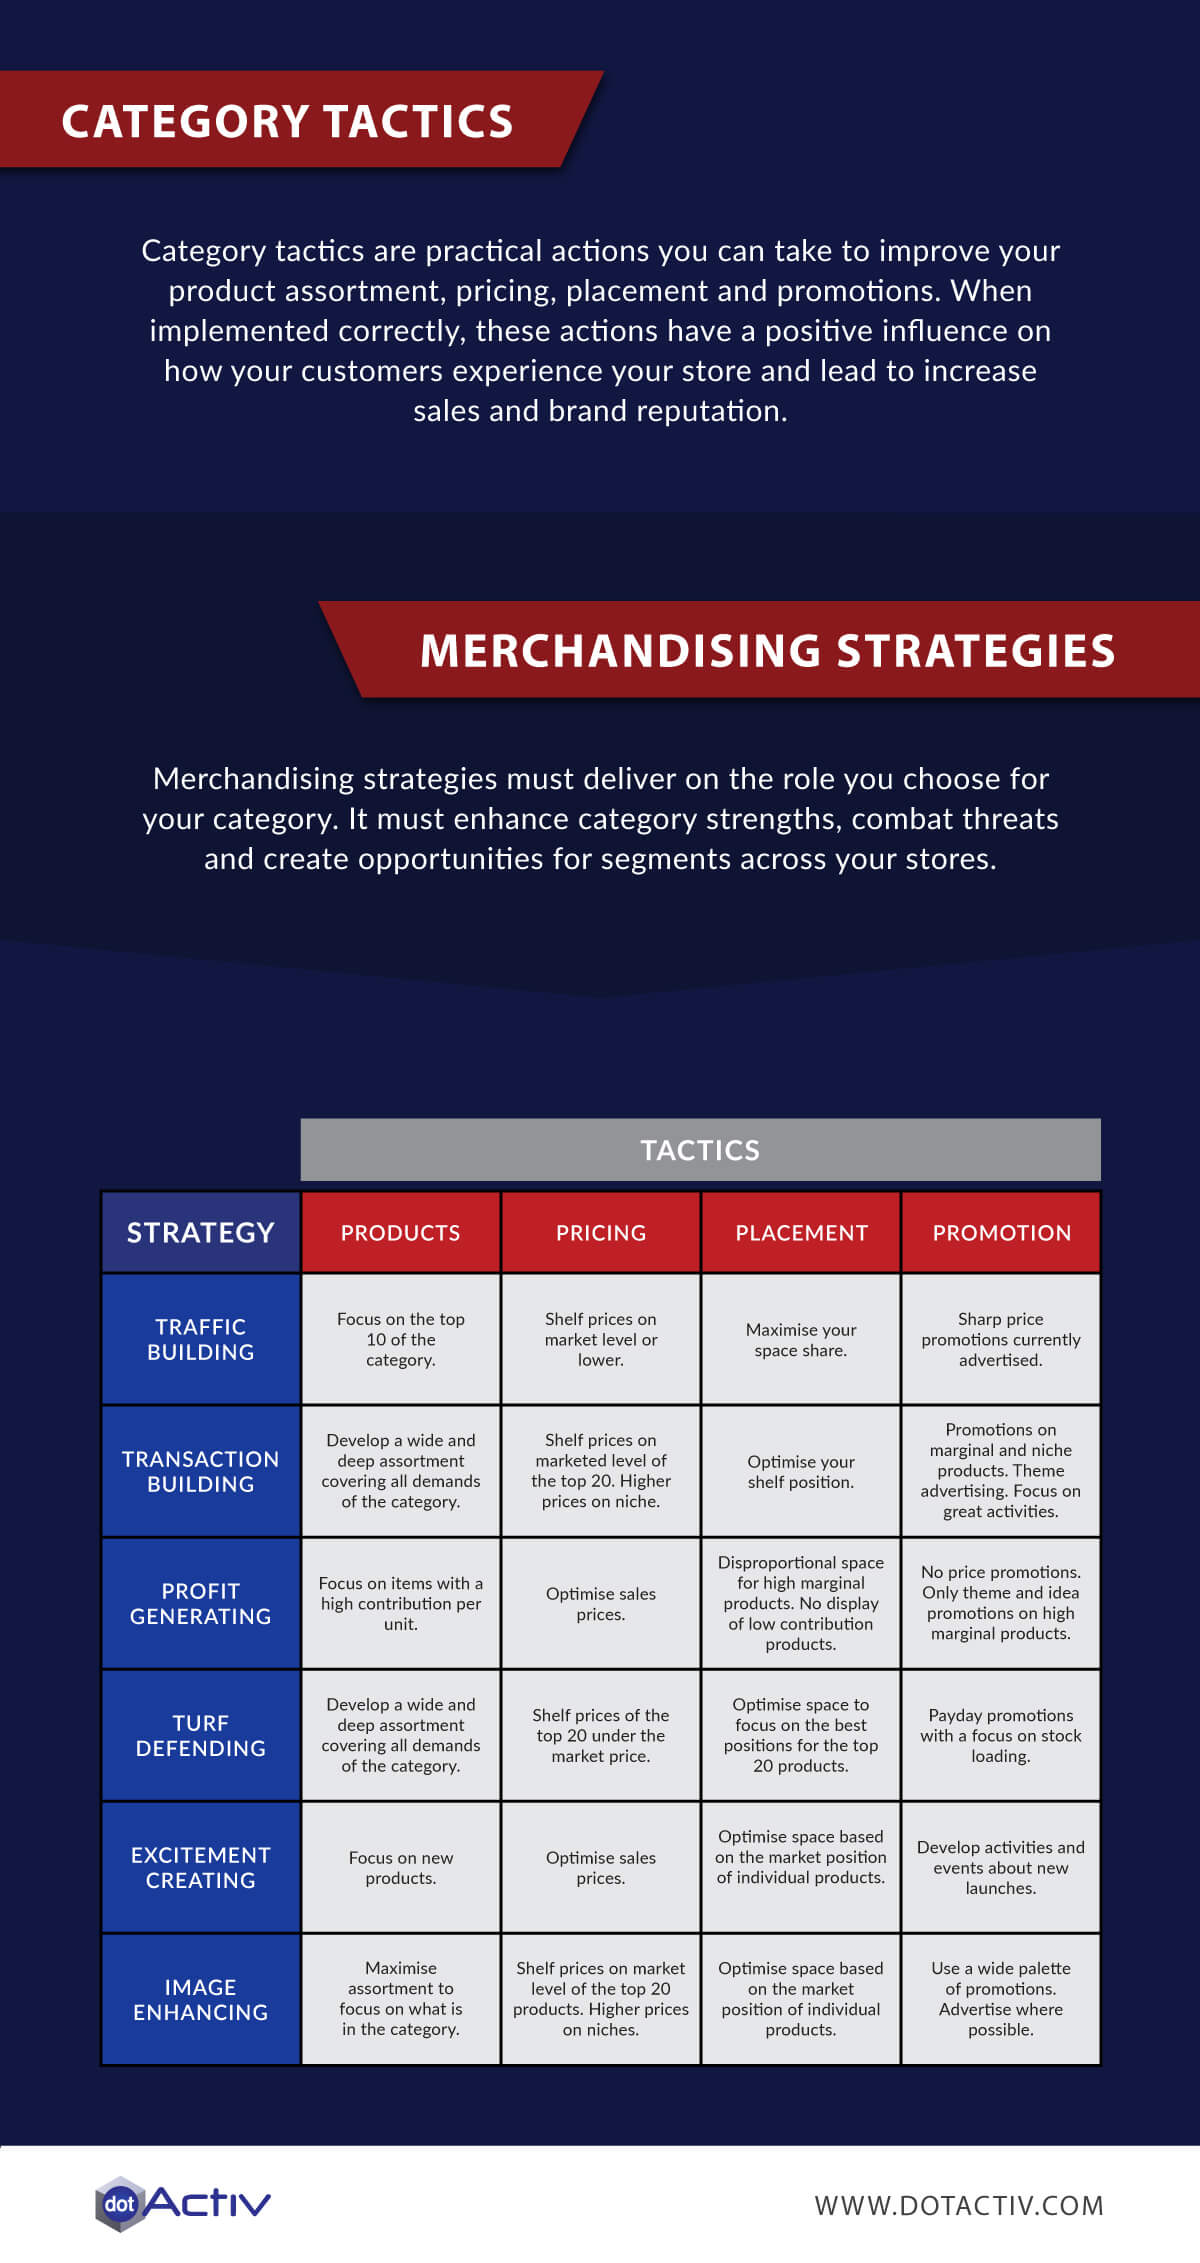 Category Tactics and Merchandising Strategies Infographic